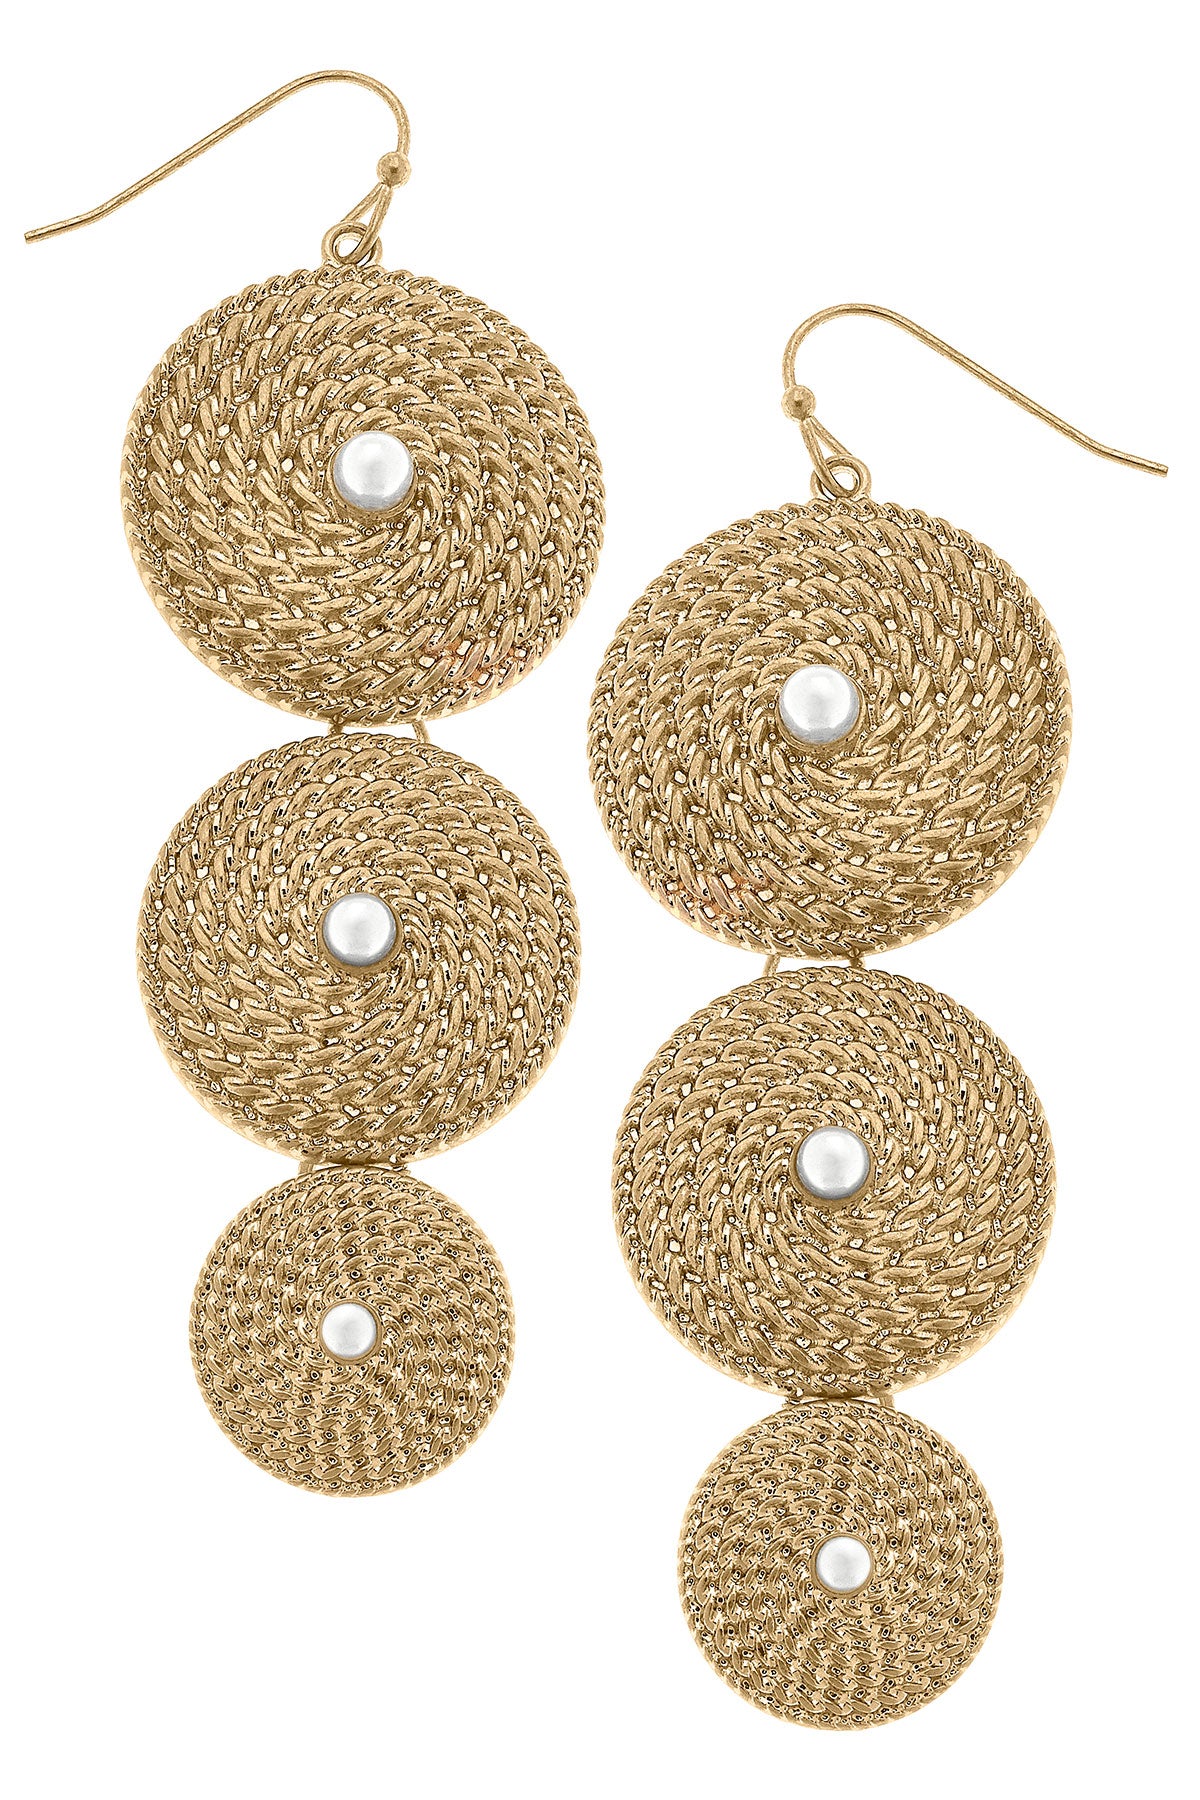 Mary Rope Coil & Pearl Drop Earrings in Worn Gold